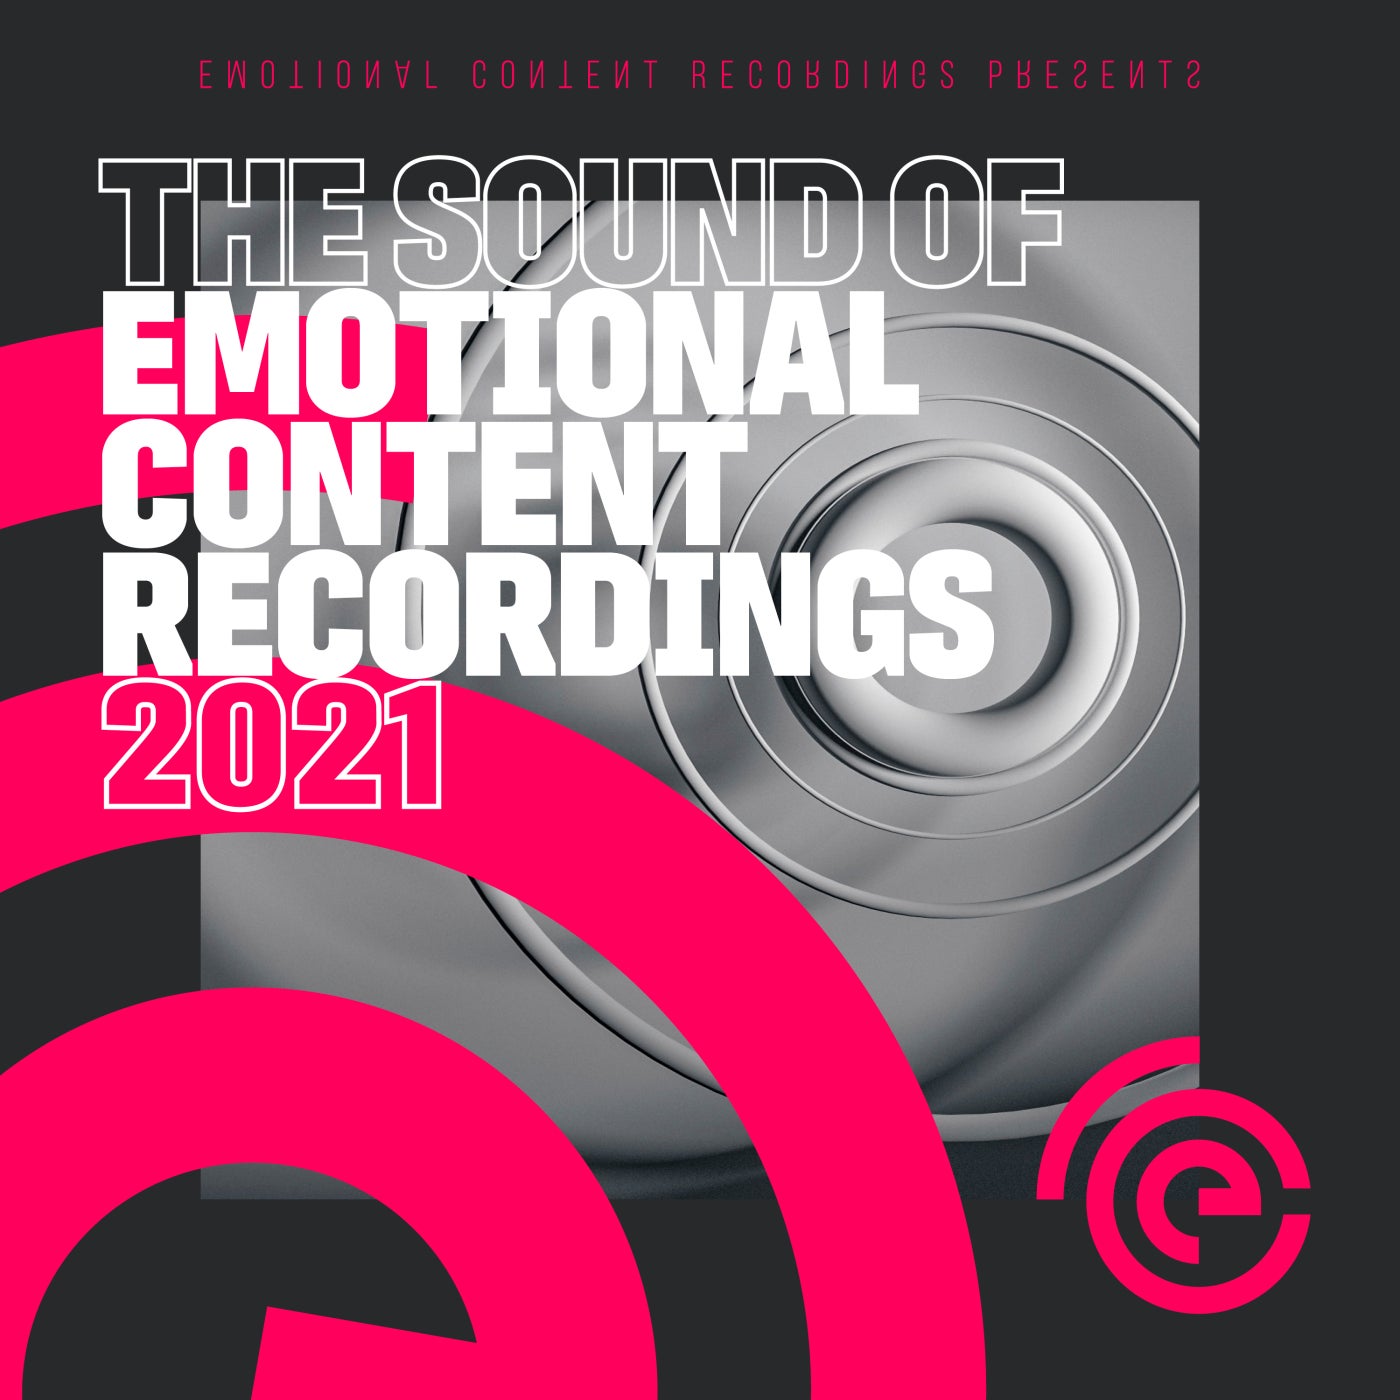 The Sound of Emotional Content Recordings 2021